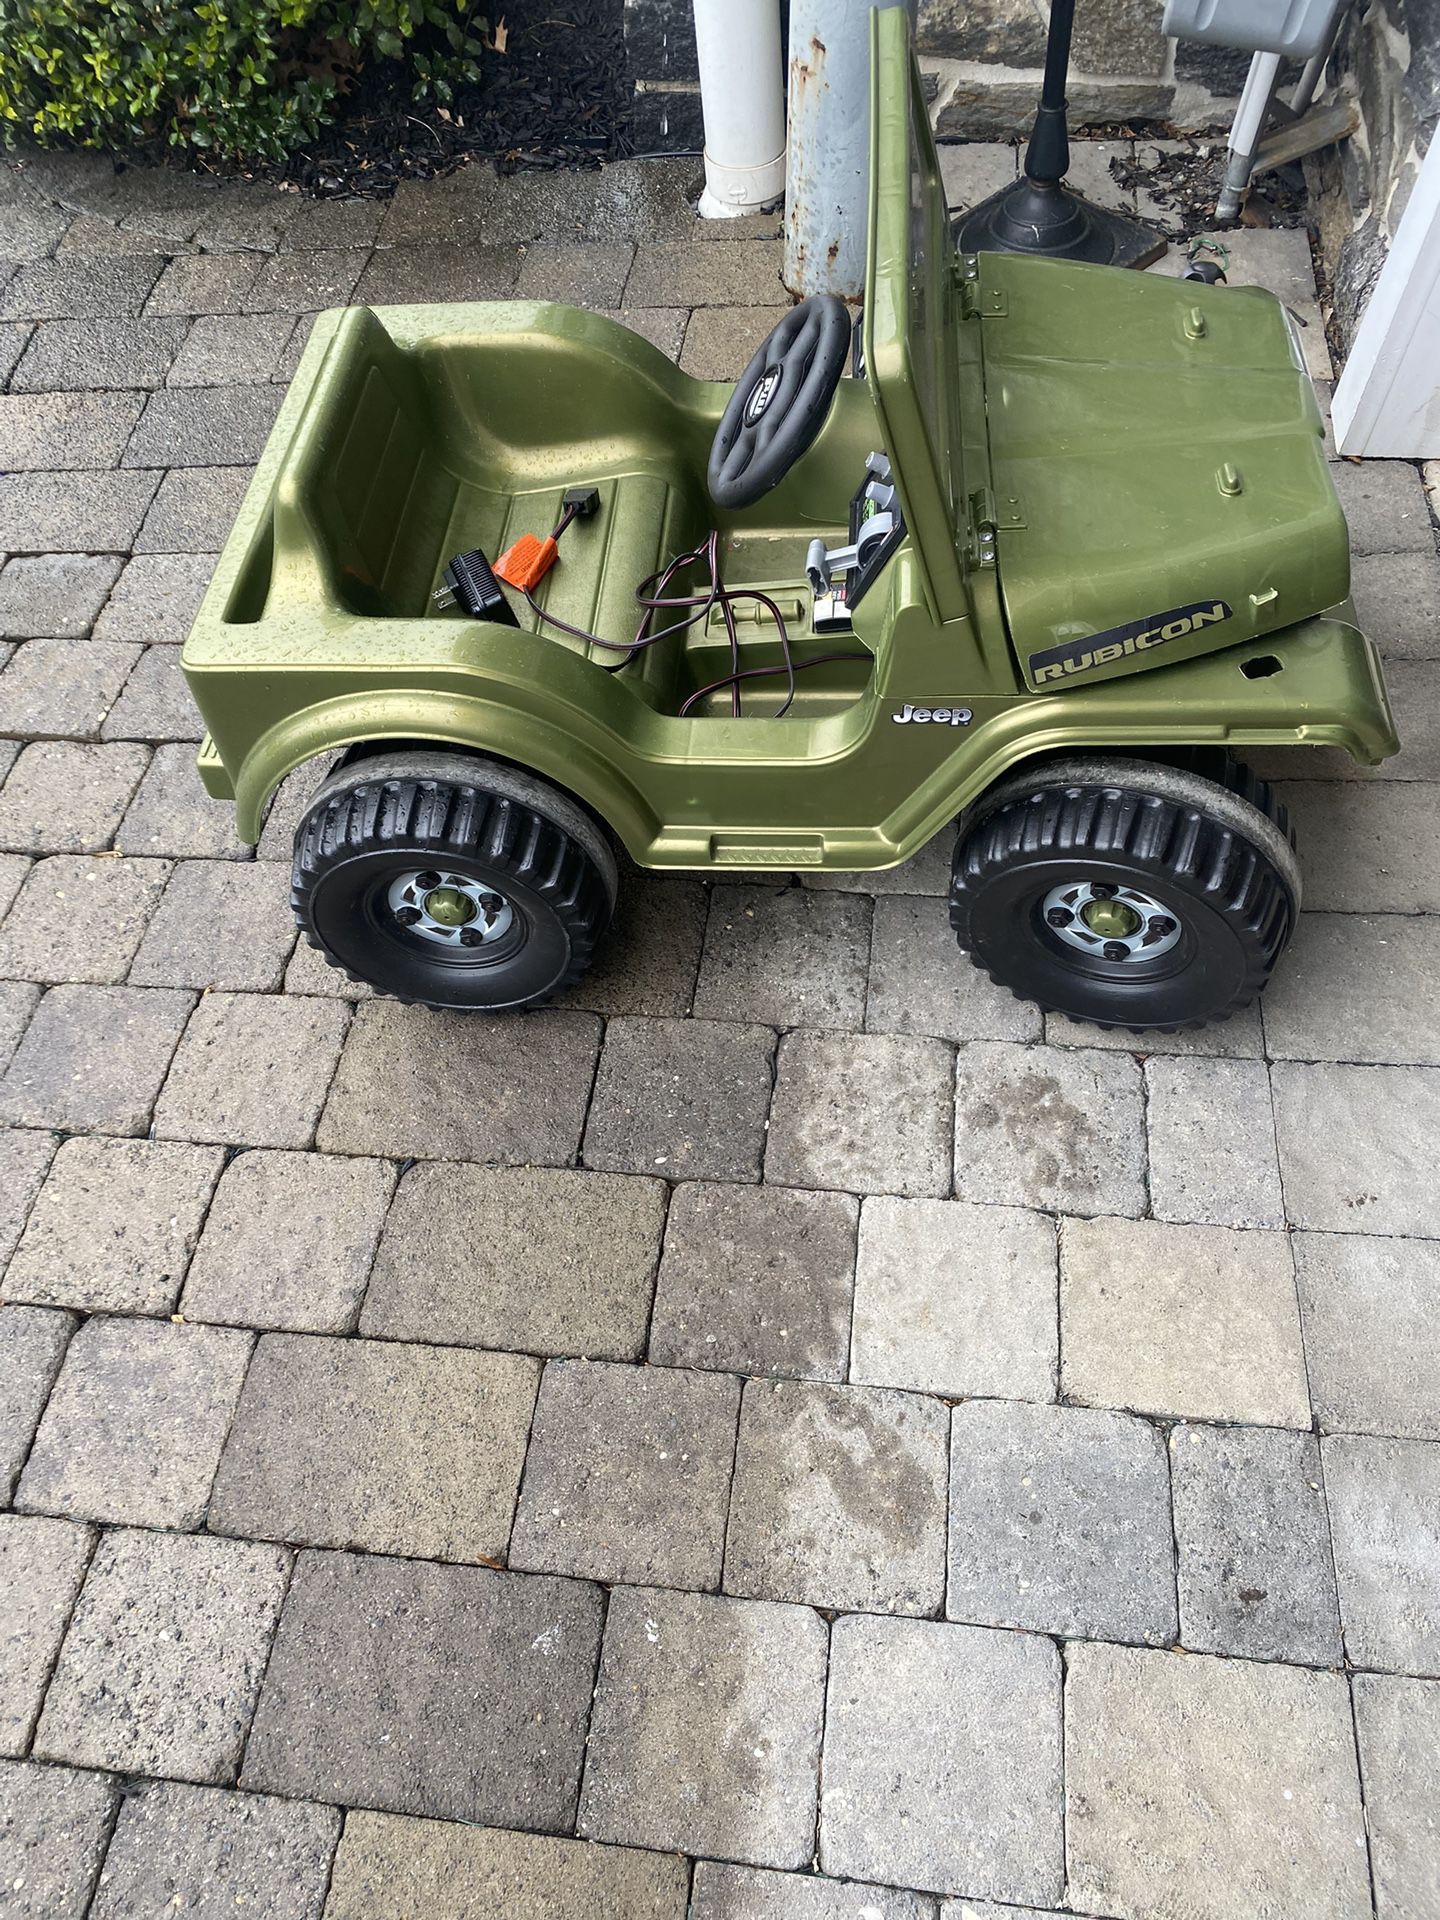 6v Kids Riding Jeep. Has Battery Charger